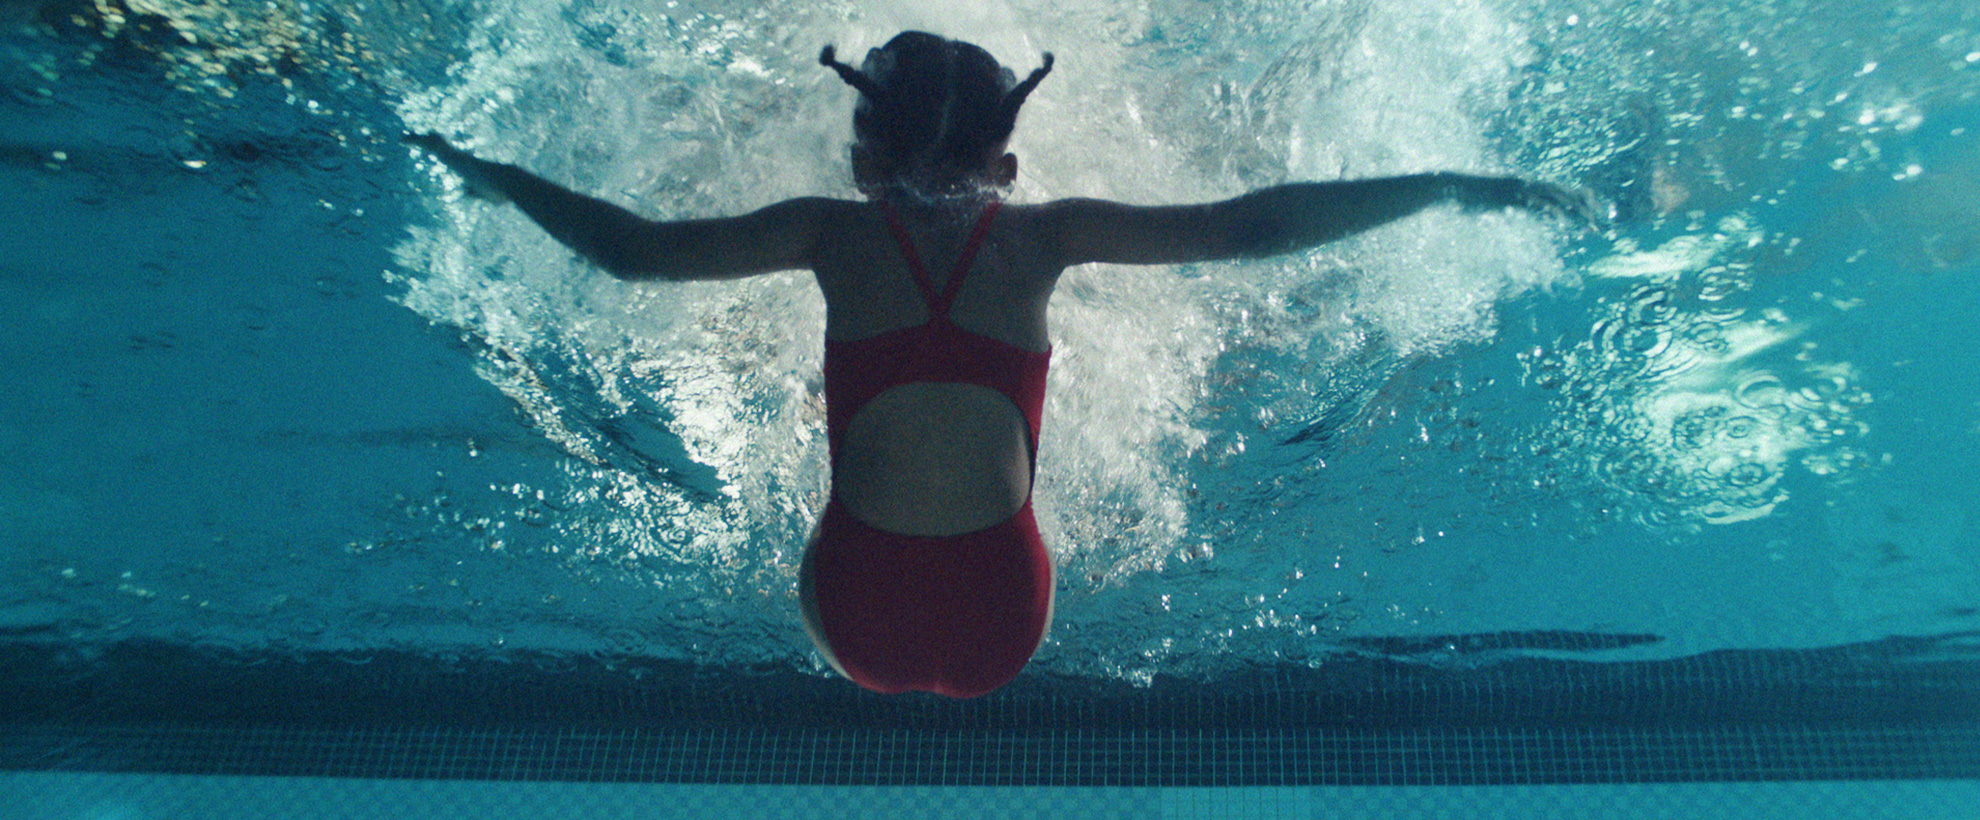 A young girl in a red swimming costume falls backwards into a pool. The shot is from the bottom of the pool, looking upwards.